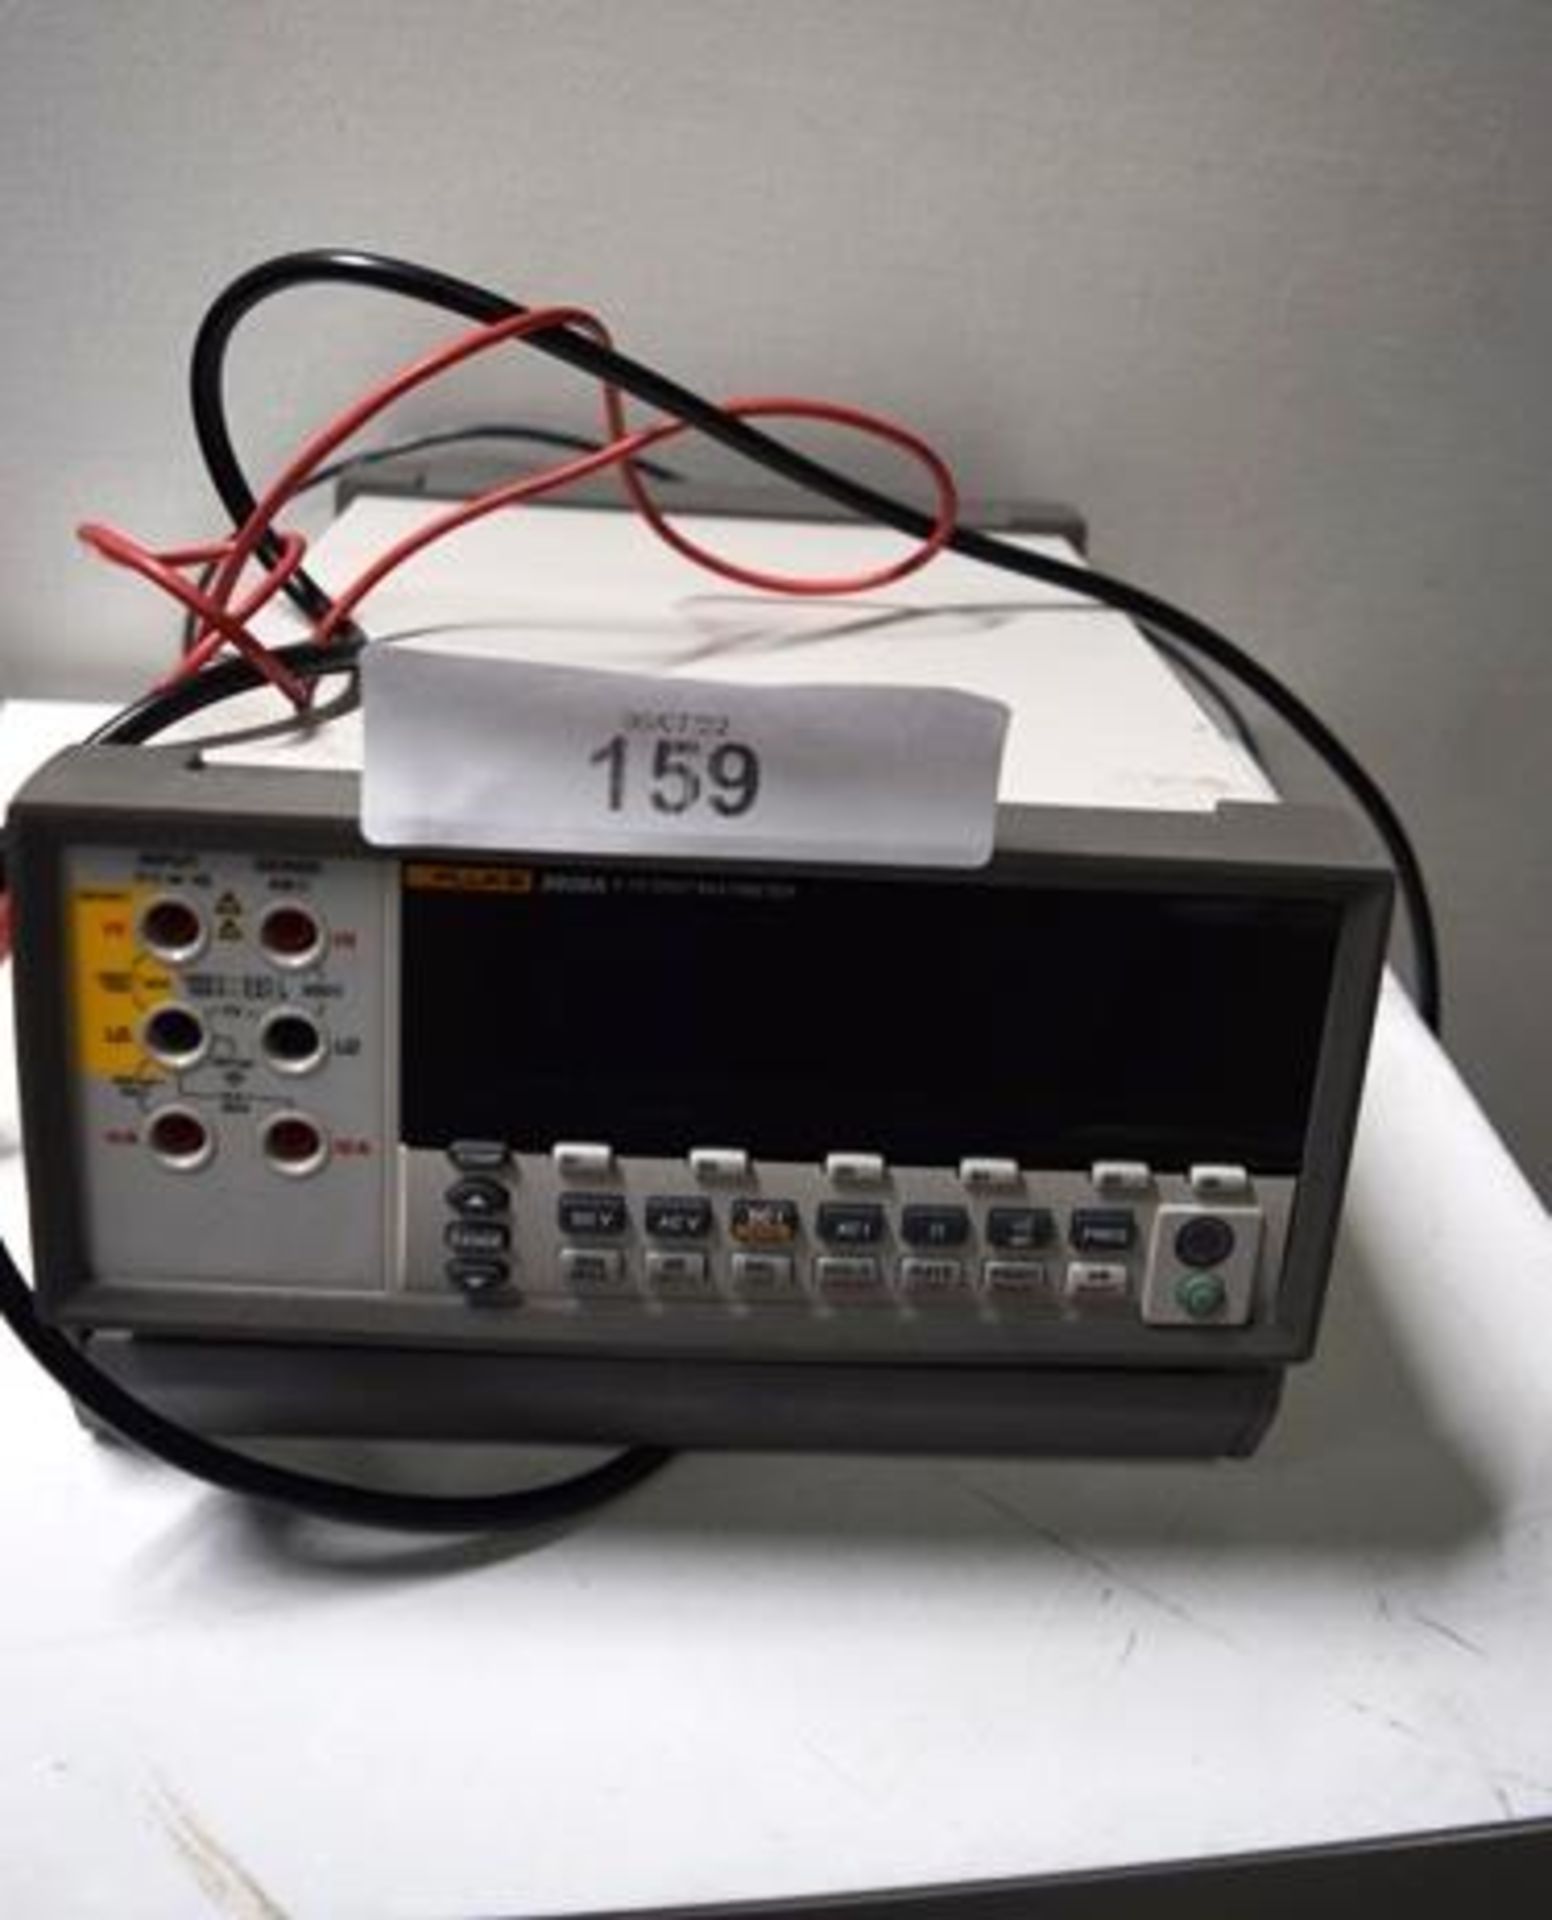 1 x Fluke 8808 A 5-1/2 digit multimeter - Second-hand, out of calibration, powers on, full - Image 2 of 5